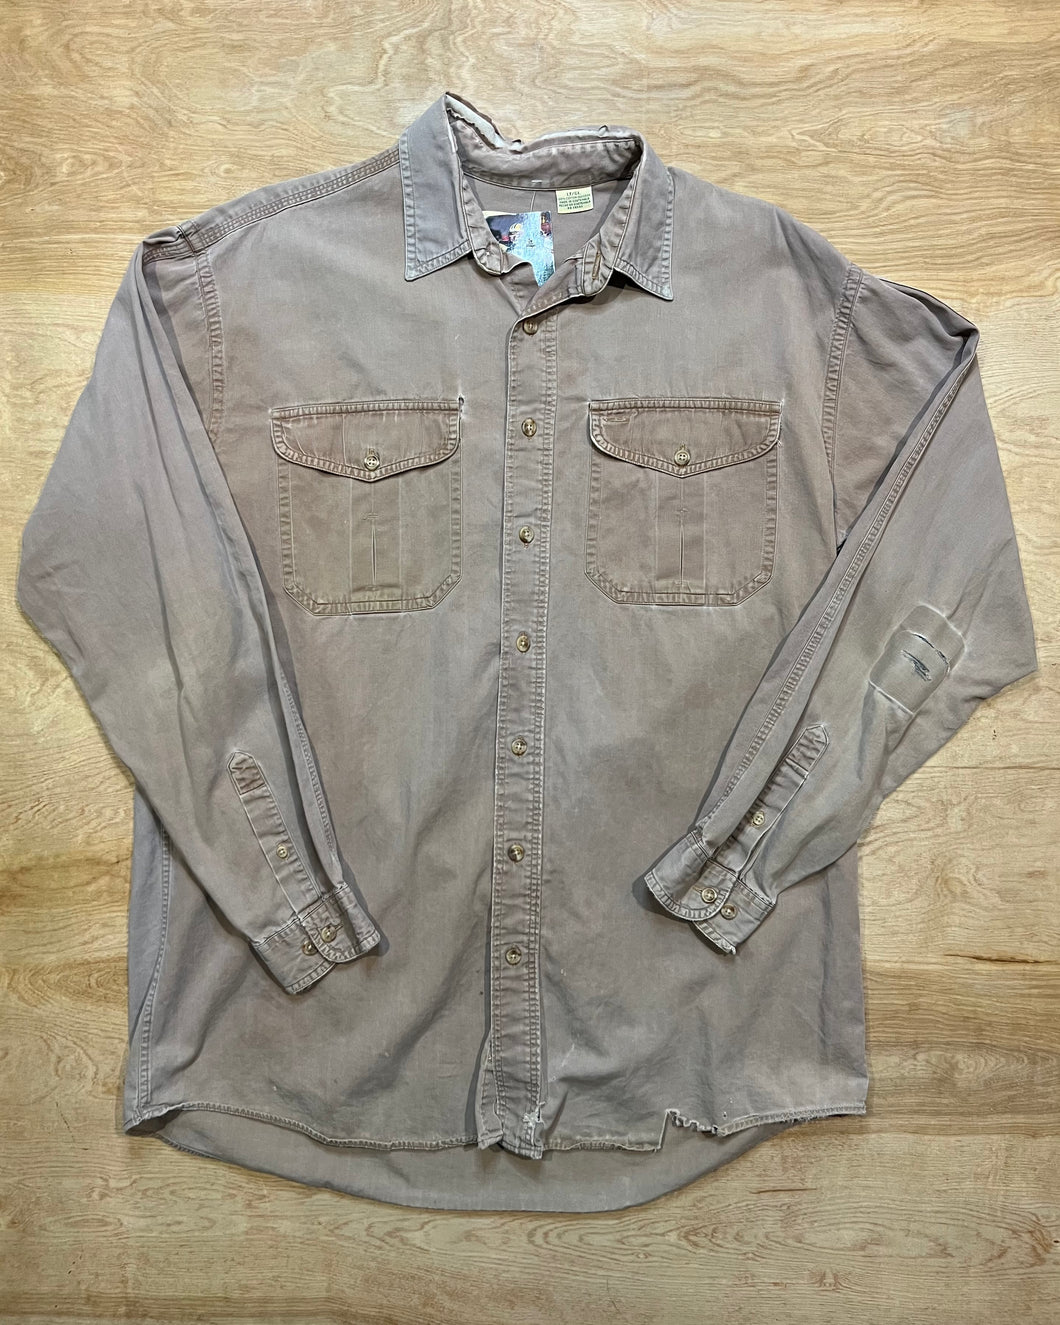 Vintage Distressed and Patched St. Johns Bay Tan Button-Up